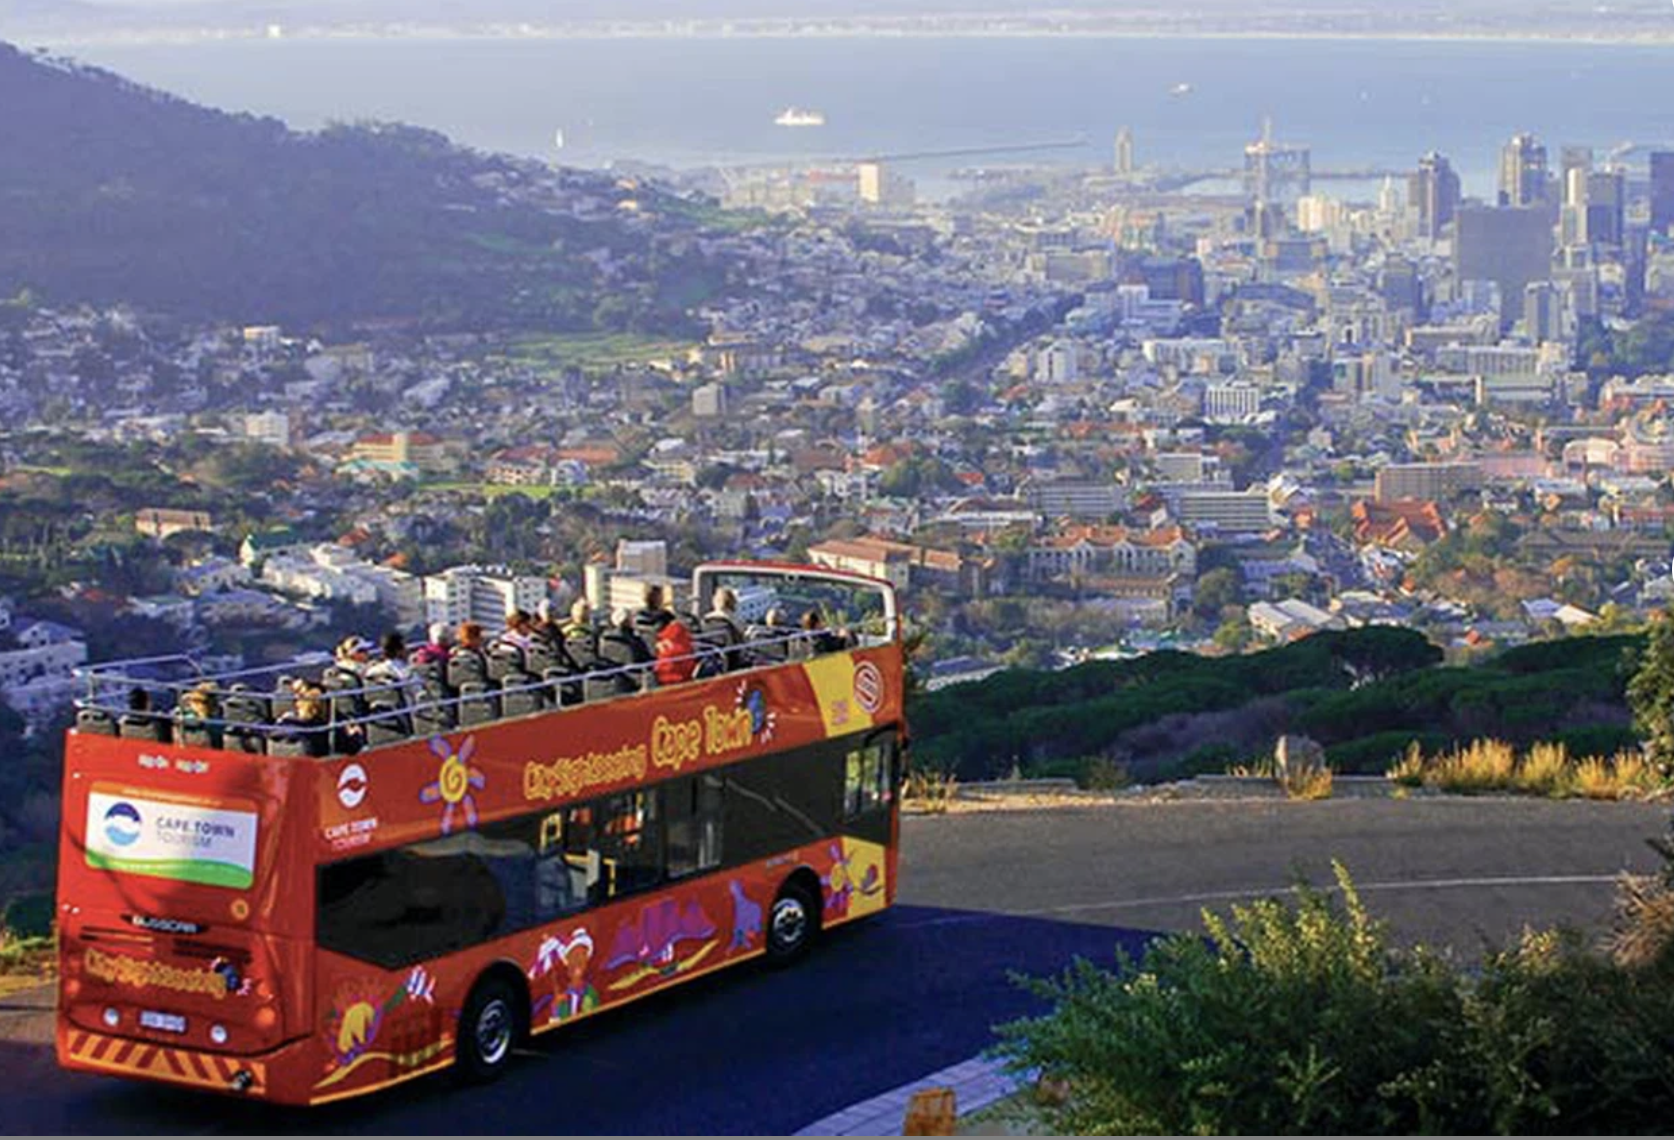 Top 10 Free activities to do on the Red Bus in Cape Town